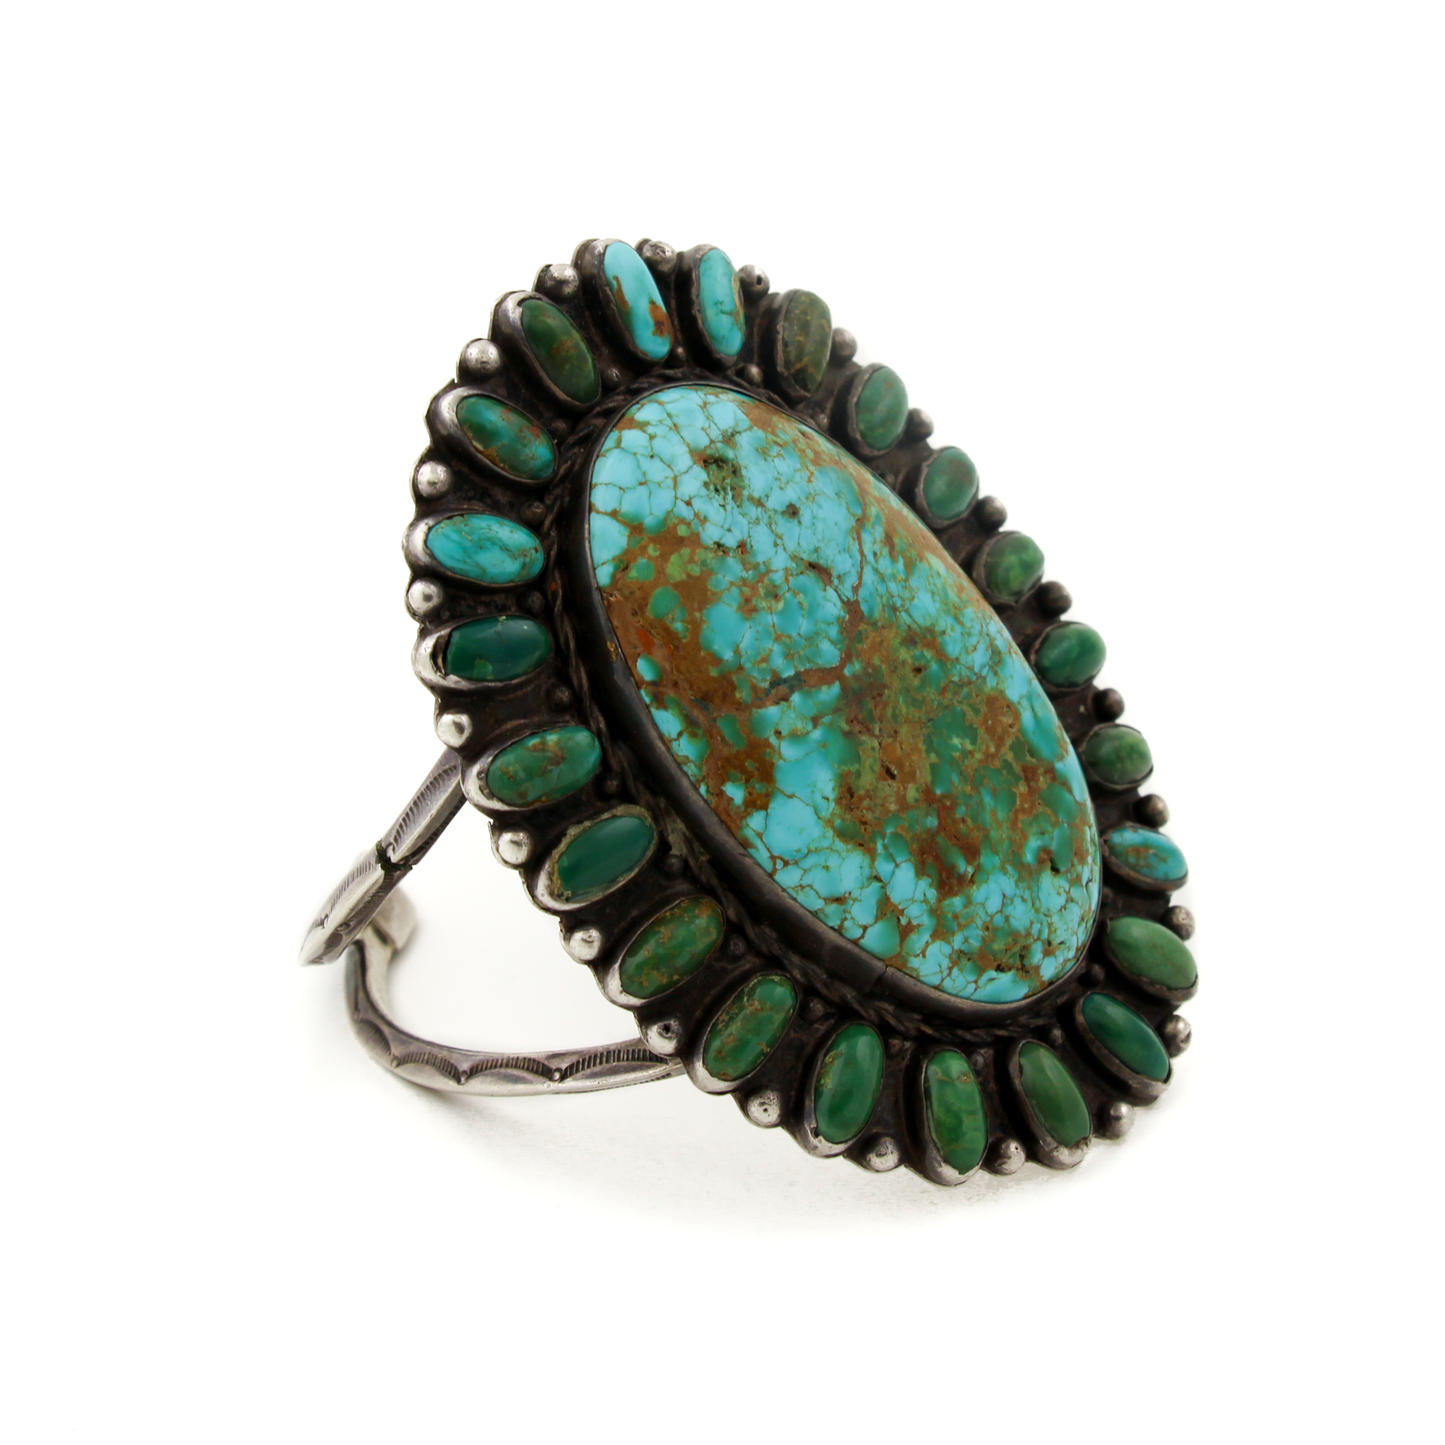 Load image into Gallery viewer, Outstanding Navajo cluster bracelet with lush natural turquoise stones
